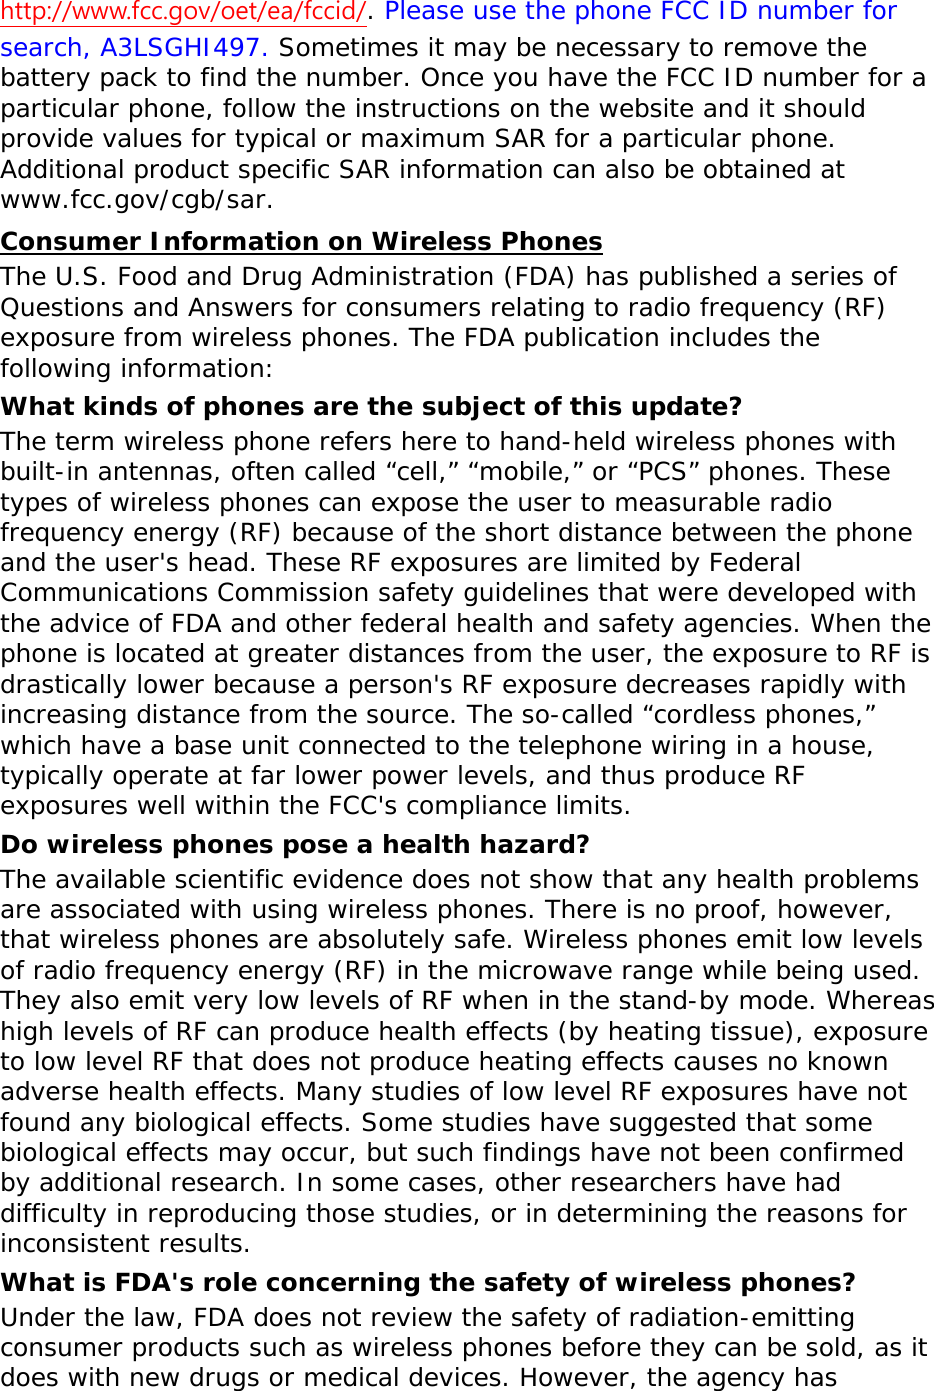 http://www.fcc.gov/oet/ea/fccid/. Please use the phone FCC ID number for search, A3LSGHI497. Sometimes it may be necessary to remove the battery pack to find the number. Once you have the FCC ID number for a particular phone, follow the instructions on the website and it should provide values for typical or maximum SAR for a particular phone. Additional product specific SAR information can also be obtained at www.fcc.gov/cgb/sar. Consumer Information on Wireless Phones The U.S. Food and Drug Administration (FDA) has published a series of Questions and Answers for consumers relating to radio frequency (RF) exposure from wireless phones. The FDA publication includes the following information: What kinds of phones are the subject of this update? The term wireless phone refers here to hand-held wireless phones with built-in antennas, often called “cell,” “mobile,” or “PCS” phones. These types of wireless phones can expose the user to measurable radio frequency energy (RF) because of the short distance between the phone and the user&apos;s head. These RF exposures are limited by Federal Communications Commission safety guidelines that were developed with the advice of FDA and other federal health and safety agencies. When the phone is located at greater distances from the user, the exposure to RF is drastically lower because a person&apos;s RF exposure decreases rapidly with increasing distance from the source. The so-called “cordless phones,” which have a base unit connected to the telephone wiring in a house, typically operate at far lower power levels, and thus produce RF exposures well within the FCC&apos;s compliance limits. Do wireless phones pose a health hazard? The available scientific evidence does not show that any health problems are associated with using wireless phones. There is no proof, however, that wireless phones are absolutely safe. Wireless phones emit low levels of radio frequency energy (RF) in the microwave range while being used. They also emit very low levels of RF when in the stand-by mode. Whereas high levels of RF can produce health effects (by heating tissue), exposure to low level RF that does not produce heating effects causes no known adverse health effects. Many studies of low level RF exposures have not found any biological effects. Some studies have suggested that some biological effects may occur, but such findings have not been confirmed by additional research. In some cases, other researchers have had difficulty in reproducing those studies, or in determining the reasons for inconsistent results. What is FDA&apos;s role concerning the safety of wireless phones? Under the law, FDA does not review the safety of radiation-emitting consumer products such as wireless phones before they can be sold, as it does with new drugs or medical devices. However, the agency has 